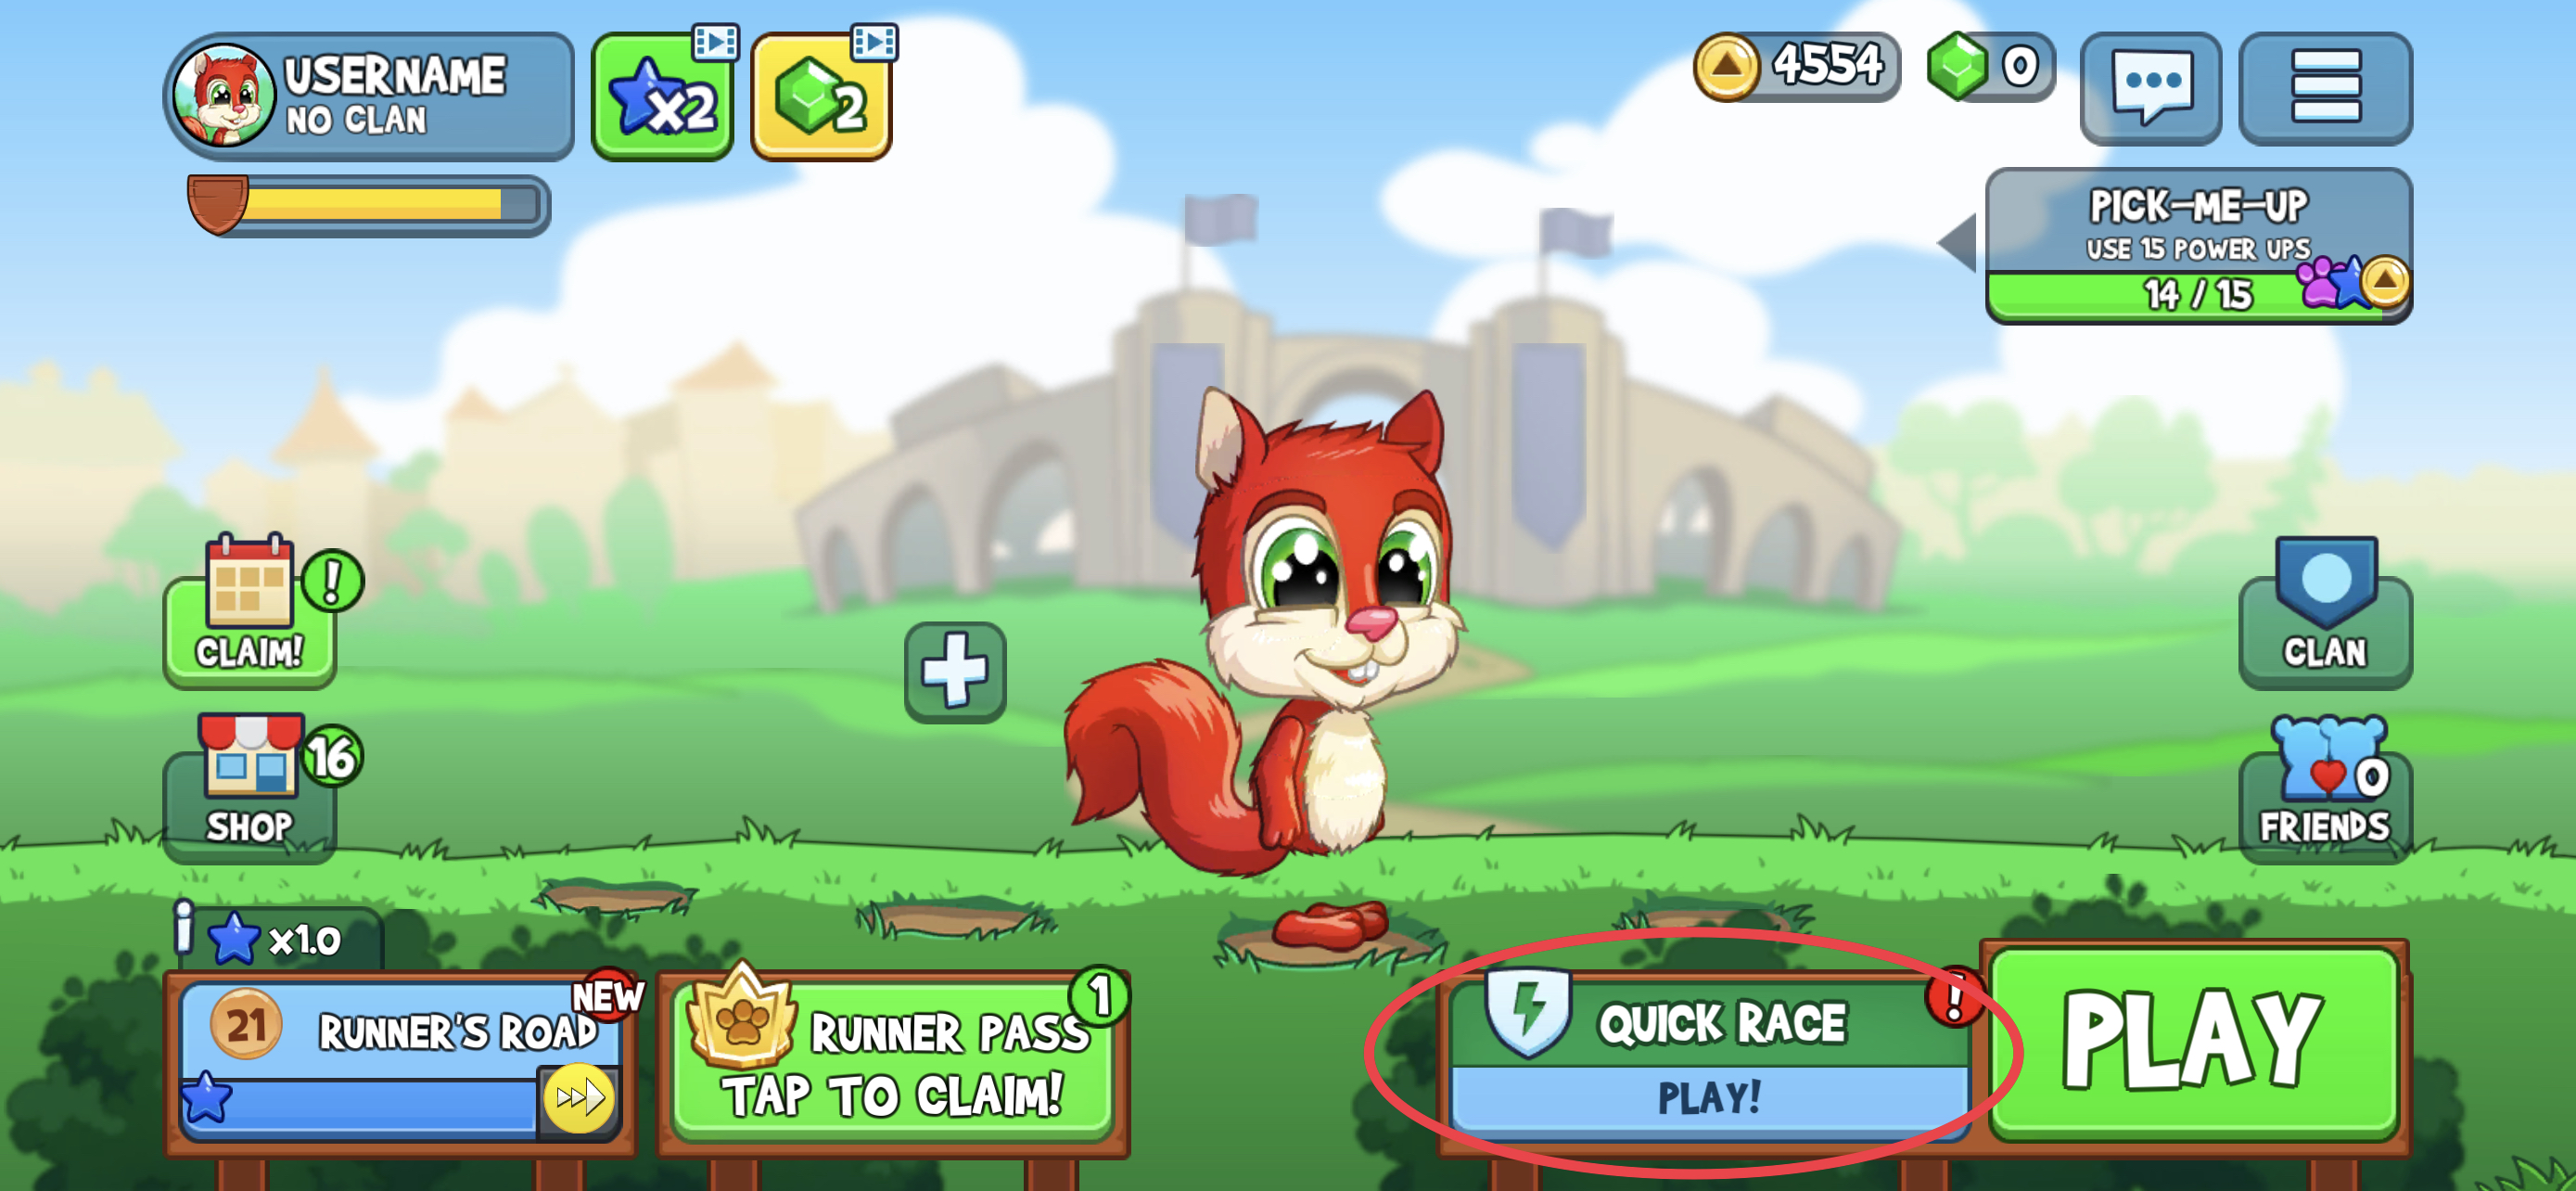 Fun Run 3 Cheats for Ultimate Style and Resources